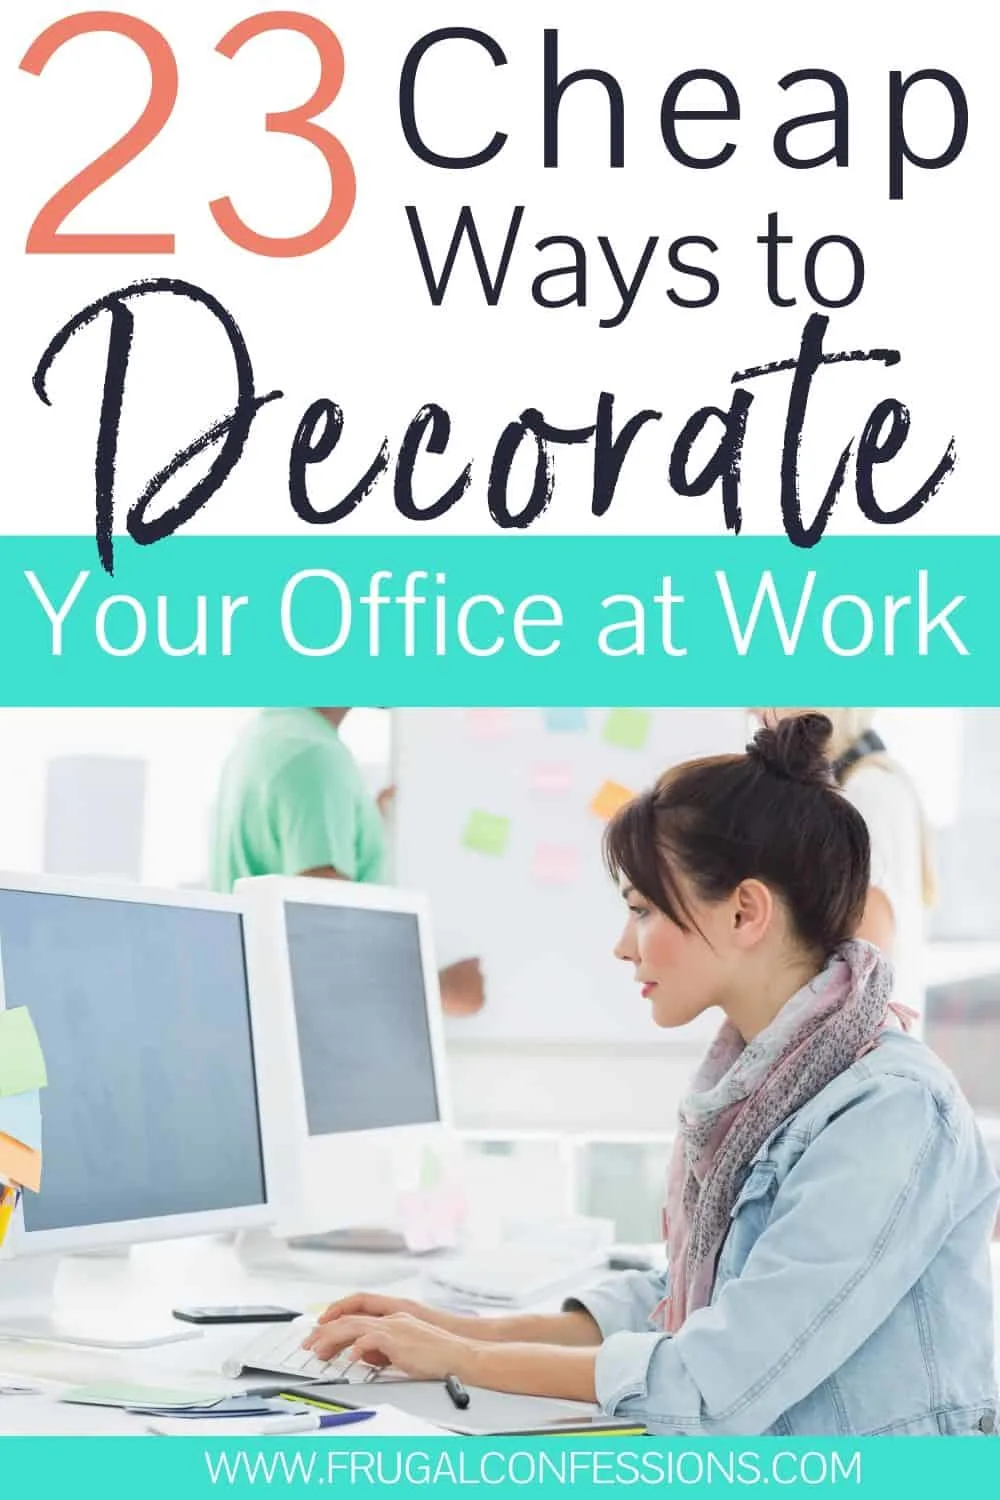 Best Cubicle Decorations for Halloween | Thrifty Blog